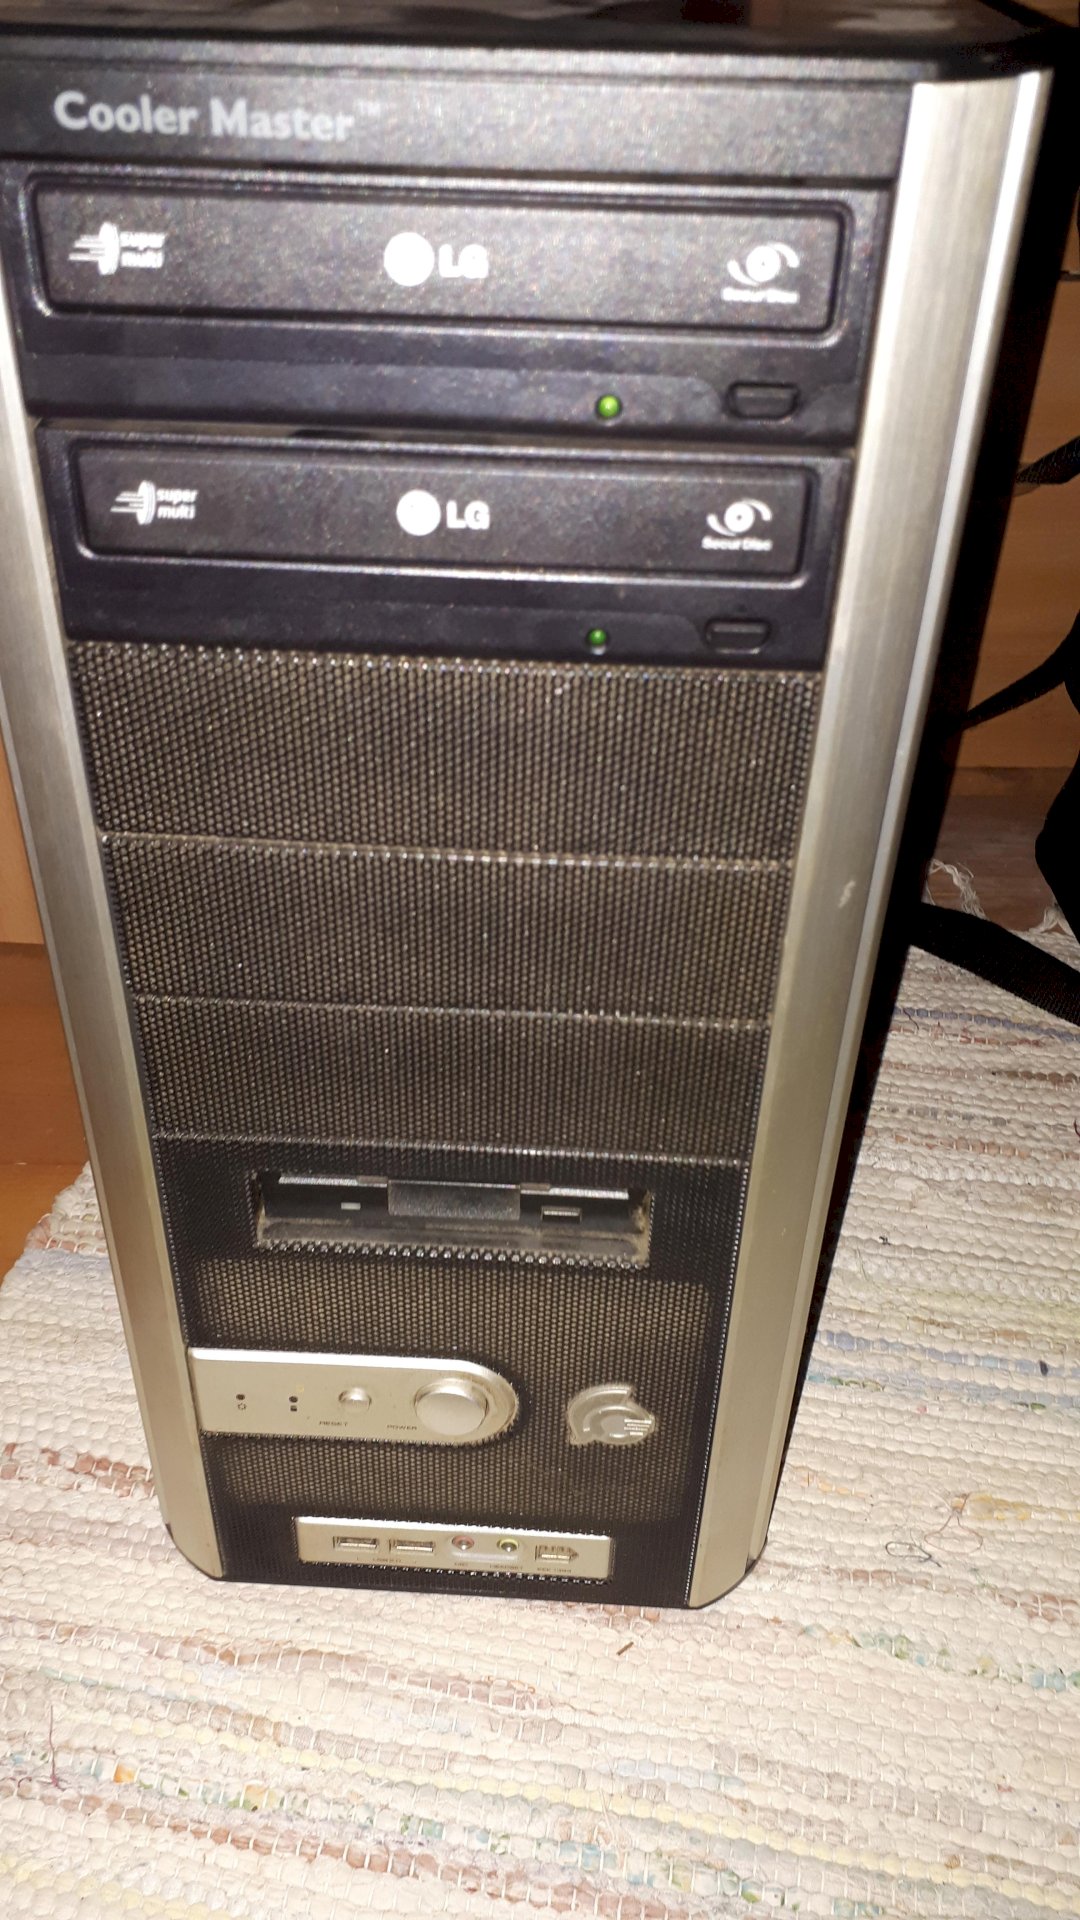 Old PC found in the attic only I have no idea what kind of PC it is and whether it is still worth using